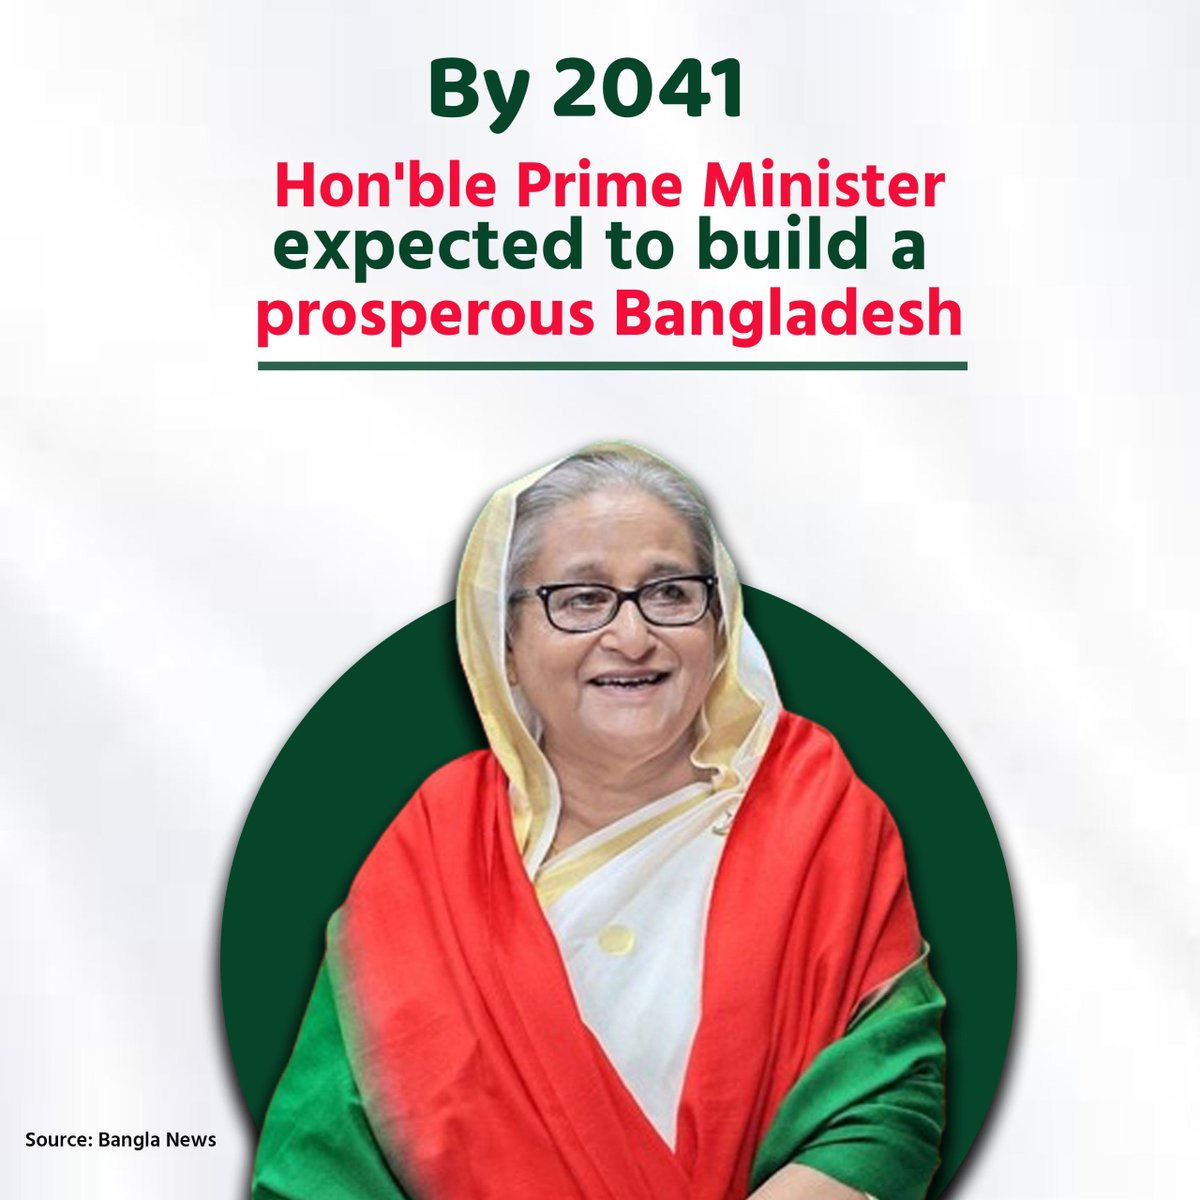 Every people of Bangladesh like Sheikh Hasina for her foresight vision for the country. May God bless her & live long.
#sheikhhasina #Bangladesh #vision2041